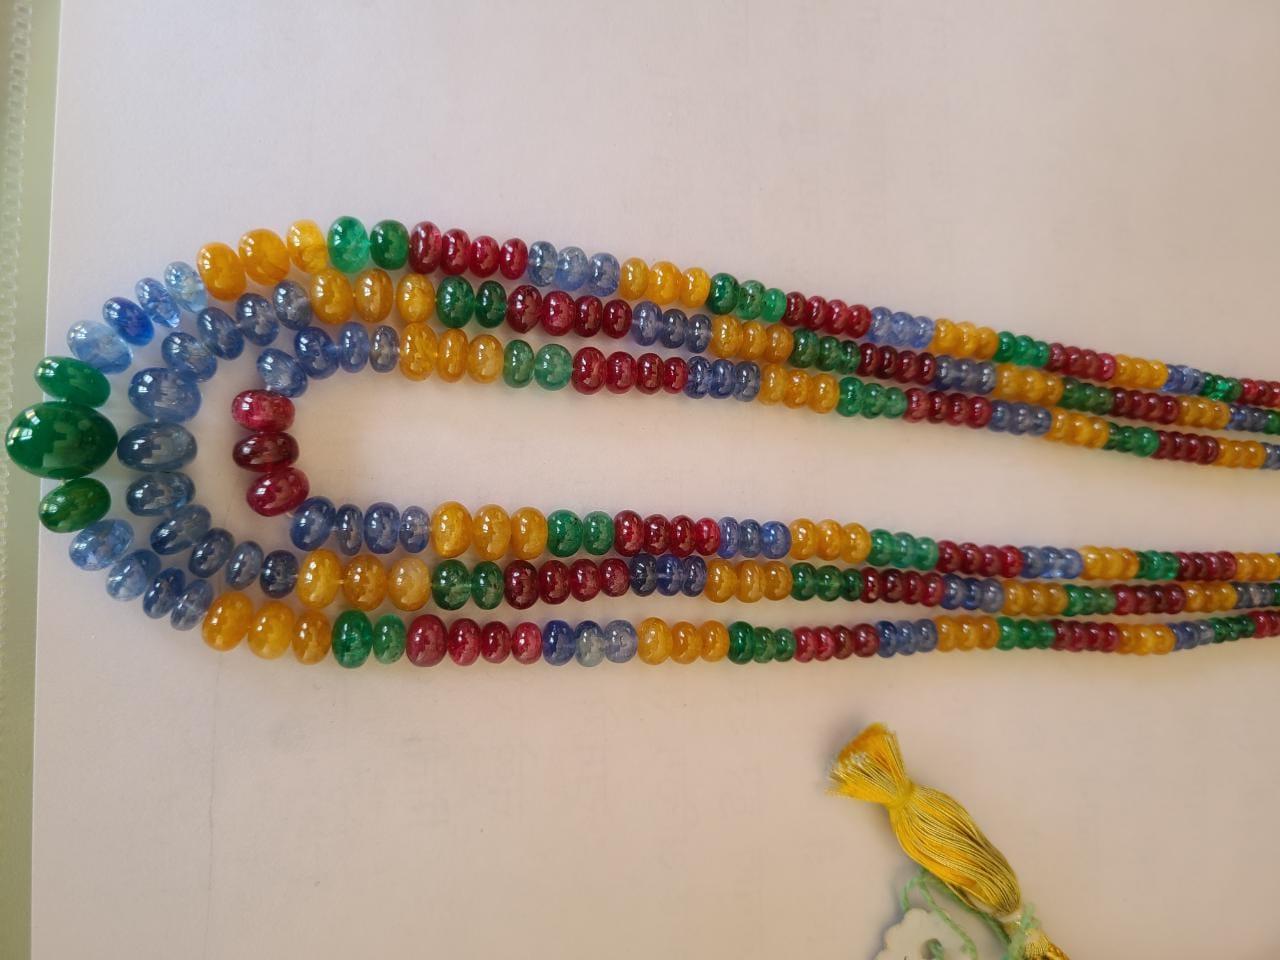 A very gorgeous & one of a kind, beaded, multi strand necklace made using natural Blue Sapphire, Emerald, Spinel & Yellow Sapphires. The Blue & Yellow Sapphires are completely natural, without any treatment and originate from Burma. The Spinel is